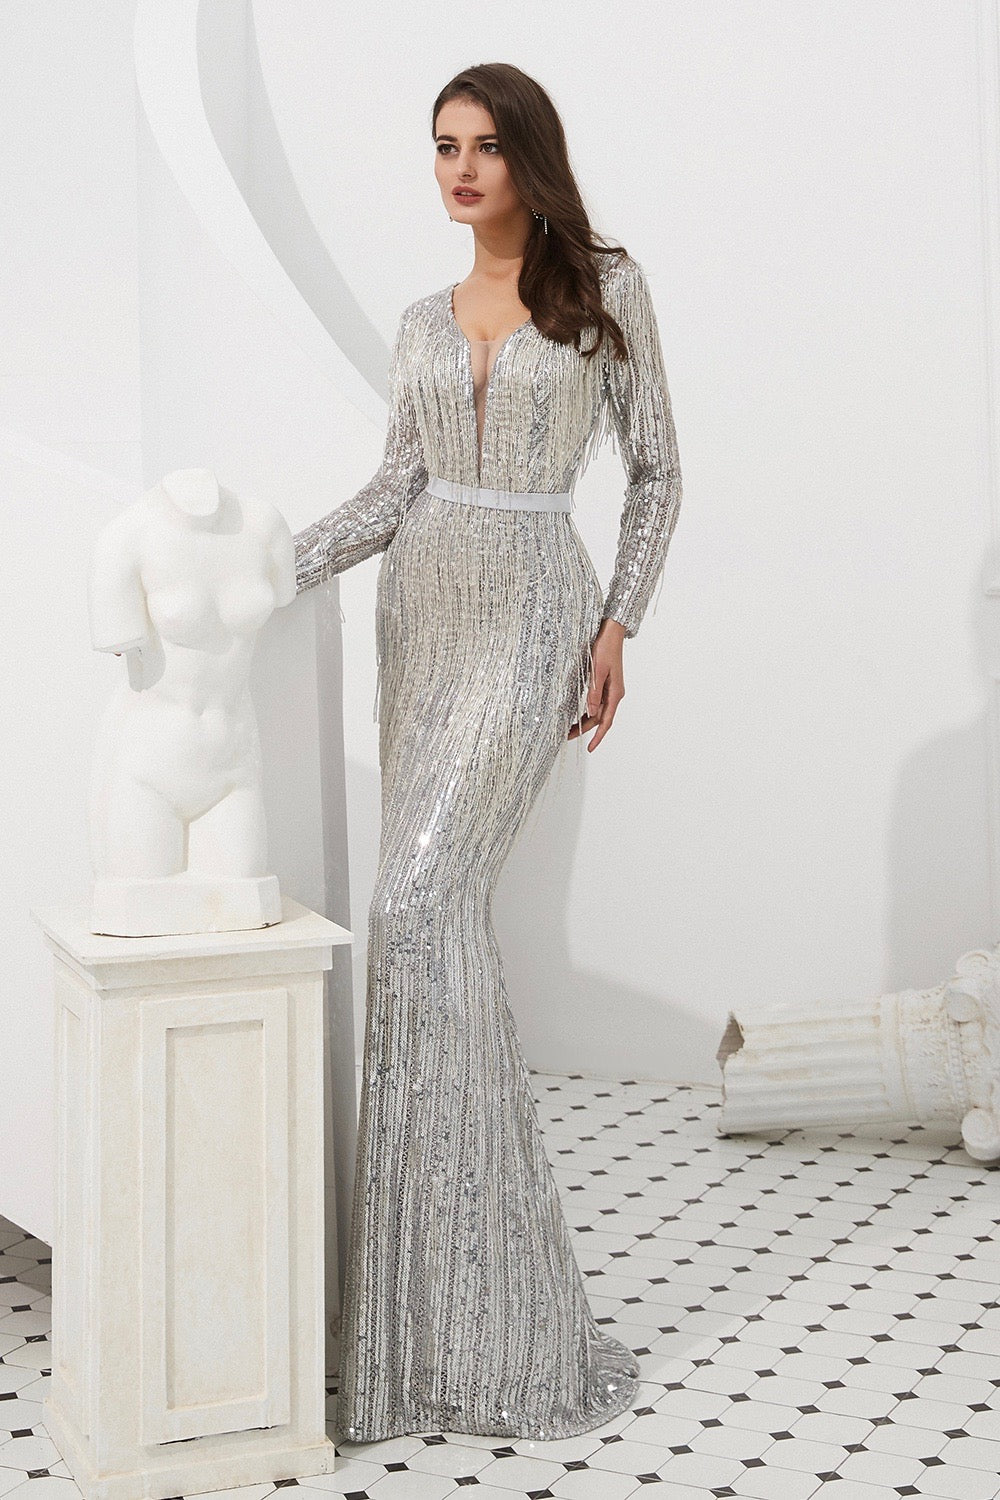 LOLA Silver Heavy Beaded Mesh Insert Long Sleeve Formal Gown Dress Private Label$ AfterPay Humm ZipPay LayBuy Sezzle